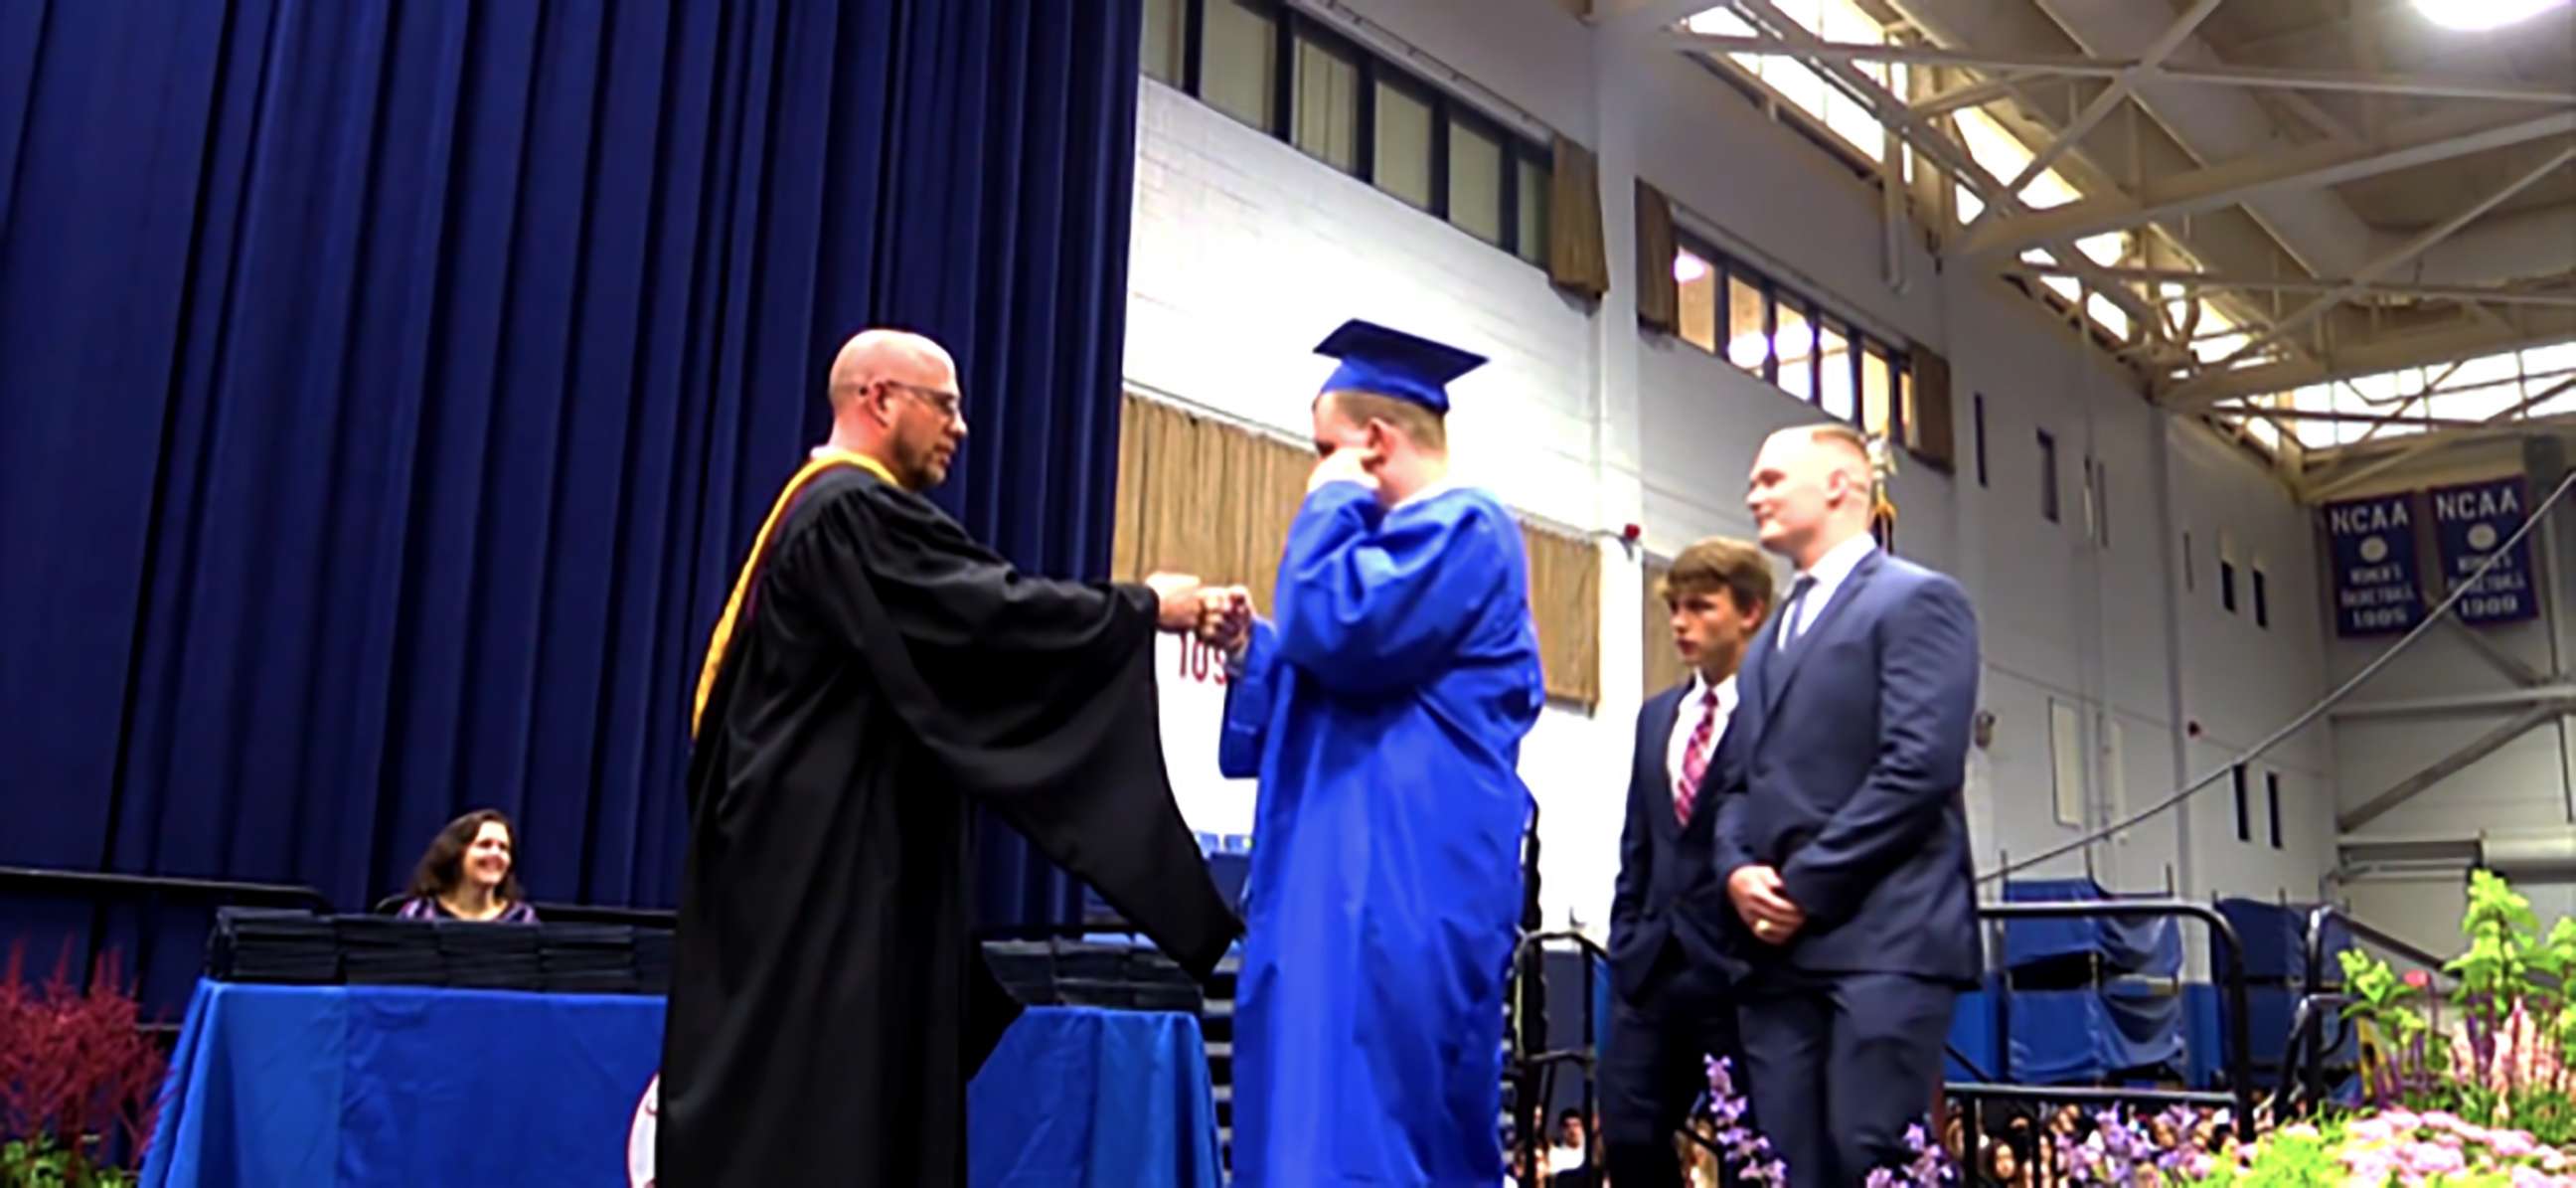 PHOTO: Jack Higgins walks up to receive his diploma from Principal Lou Riolo.